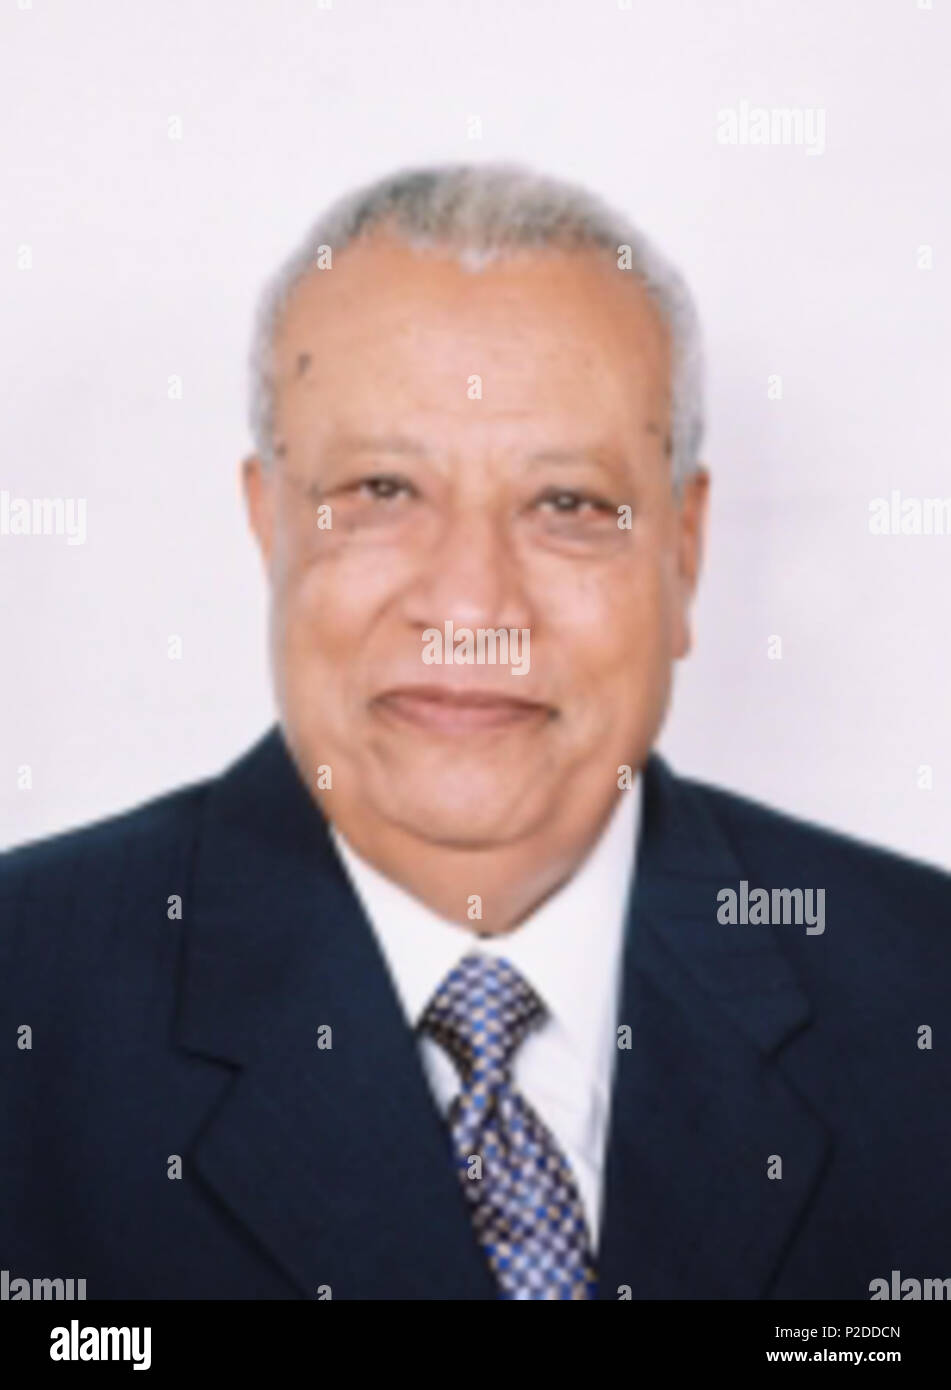 . English: Portrait of Atef Ebeid, former Prime minister of Egypt (1999-2004) and currently a member of the Egyptian Shoura Assembly. 2000s. Egyptian Shoura Assembly 5 Atef Ebeid Stock Photo